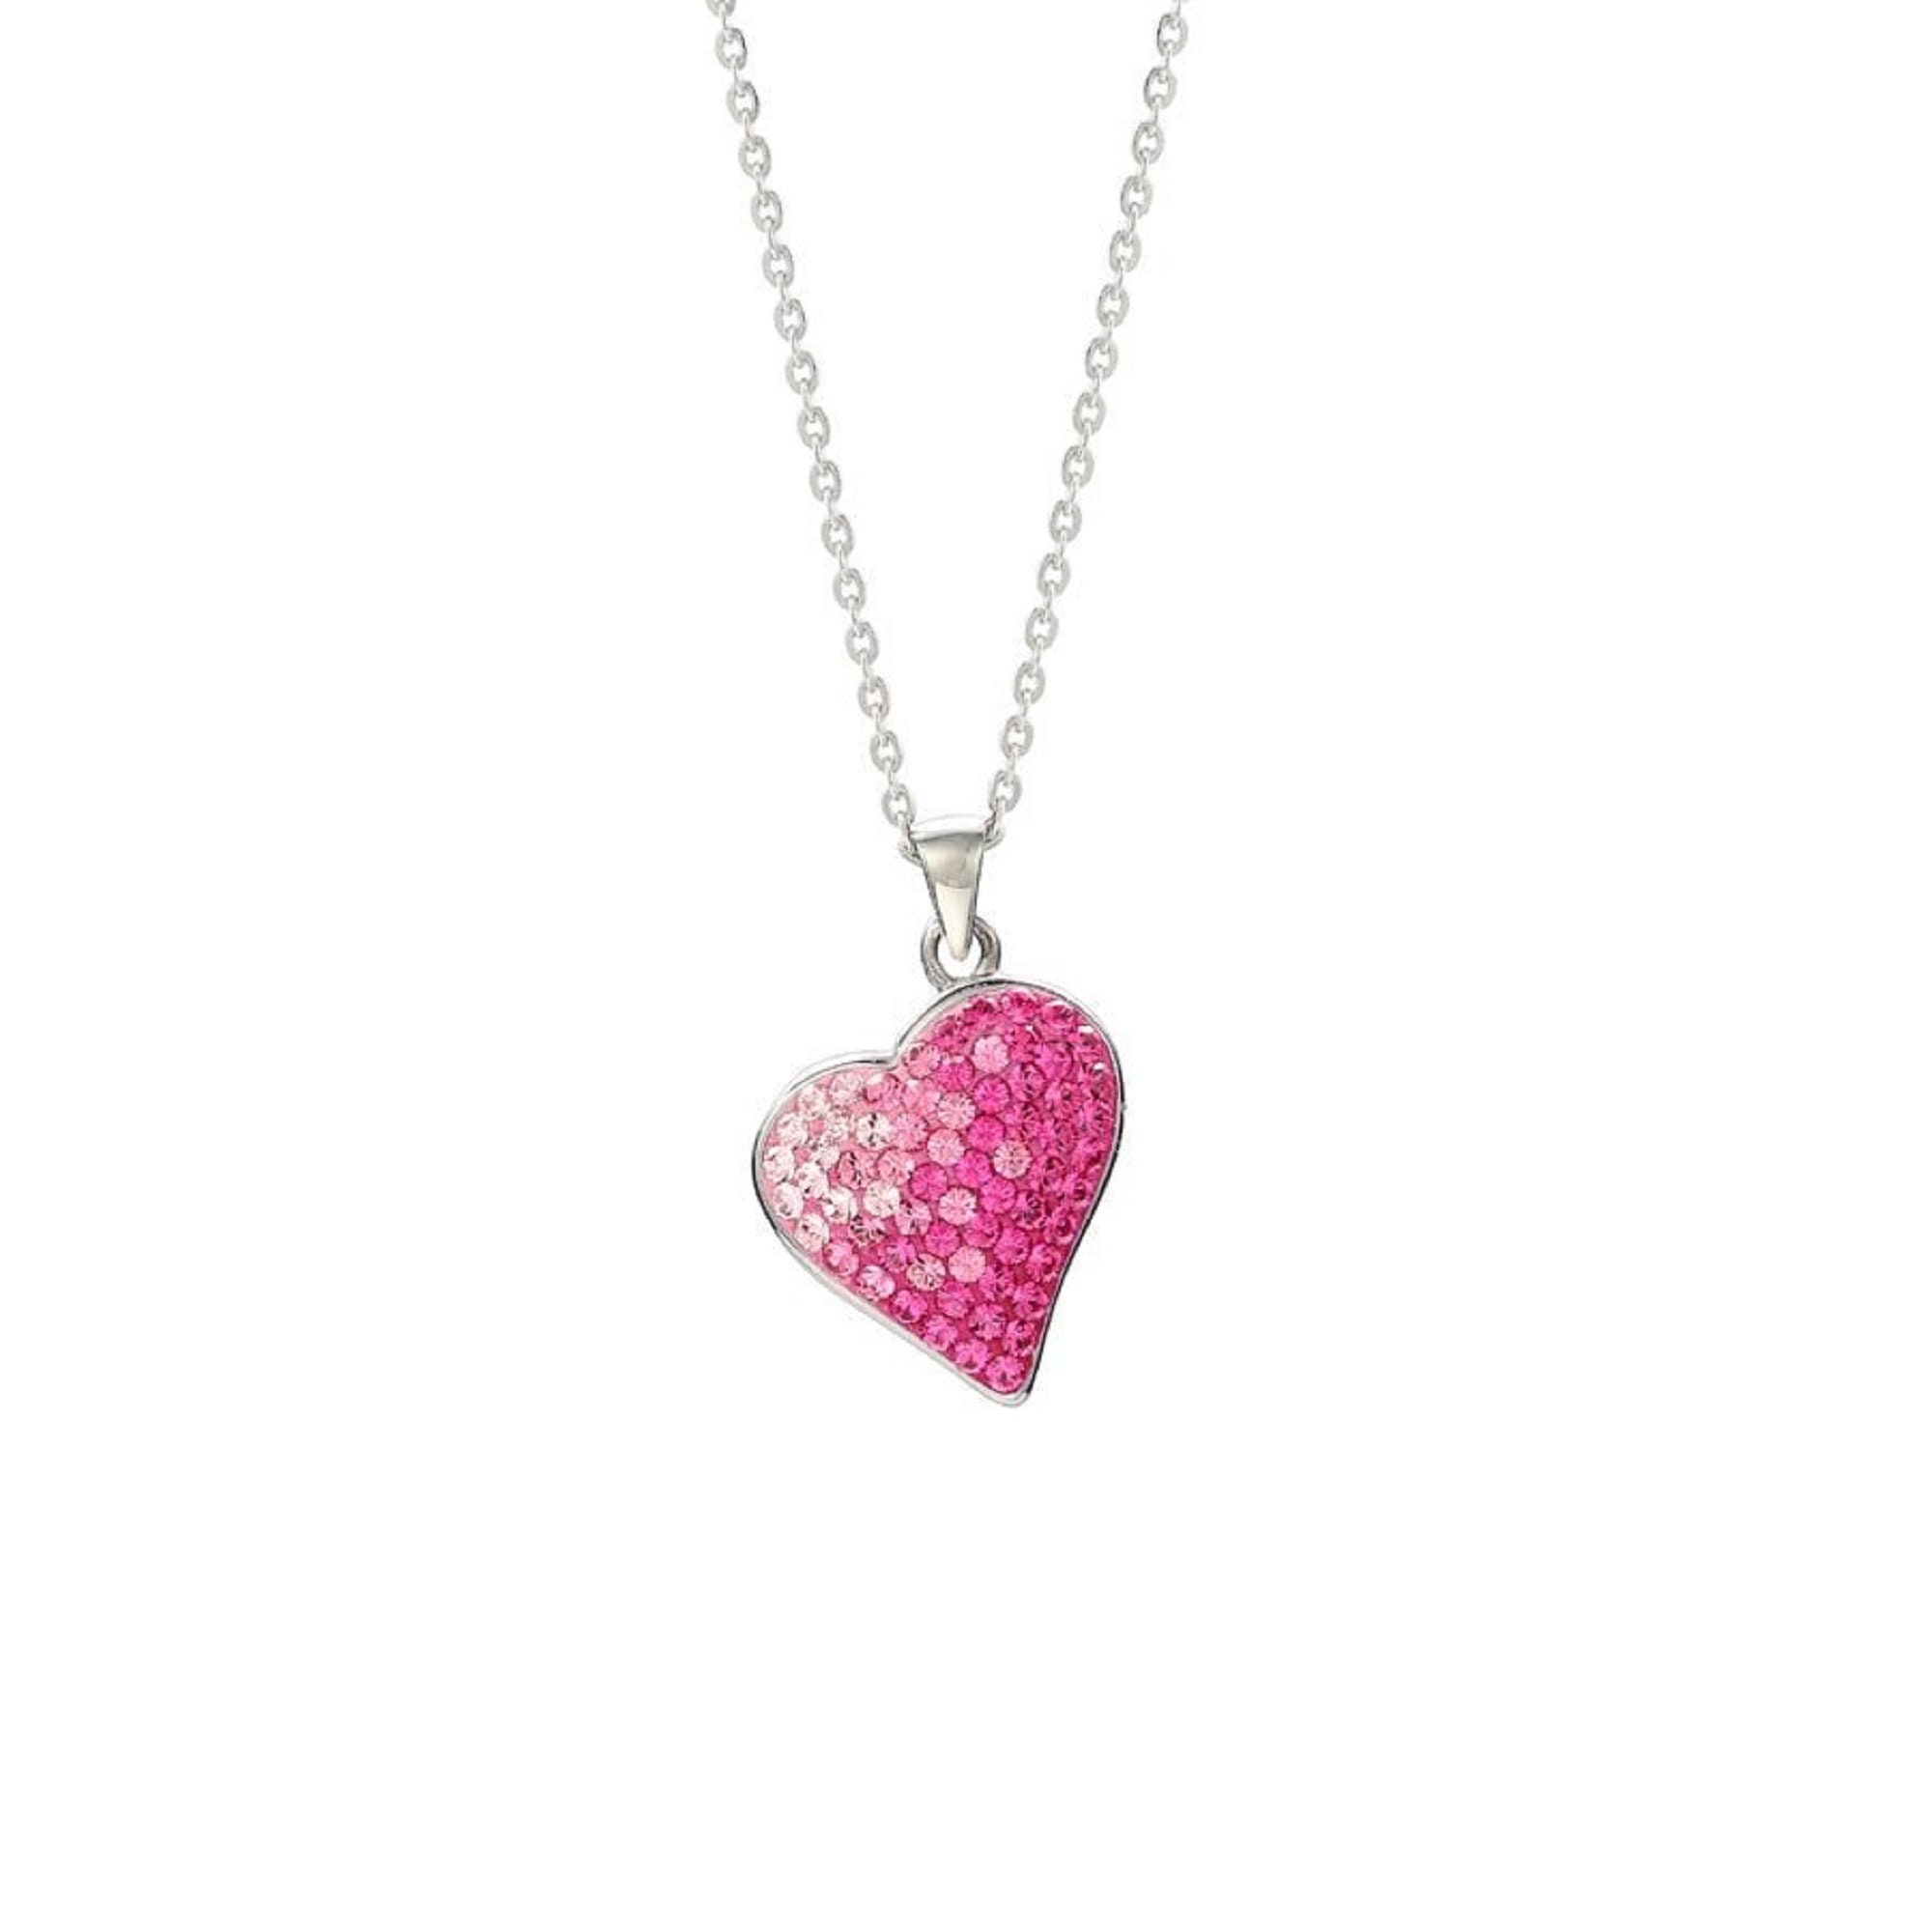 Radiant Romance: Exquisite Pink Sapphire Ombré Heart Necklace for Her